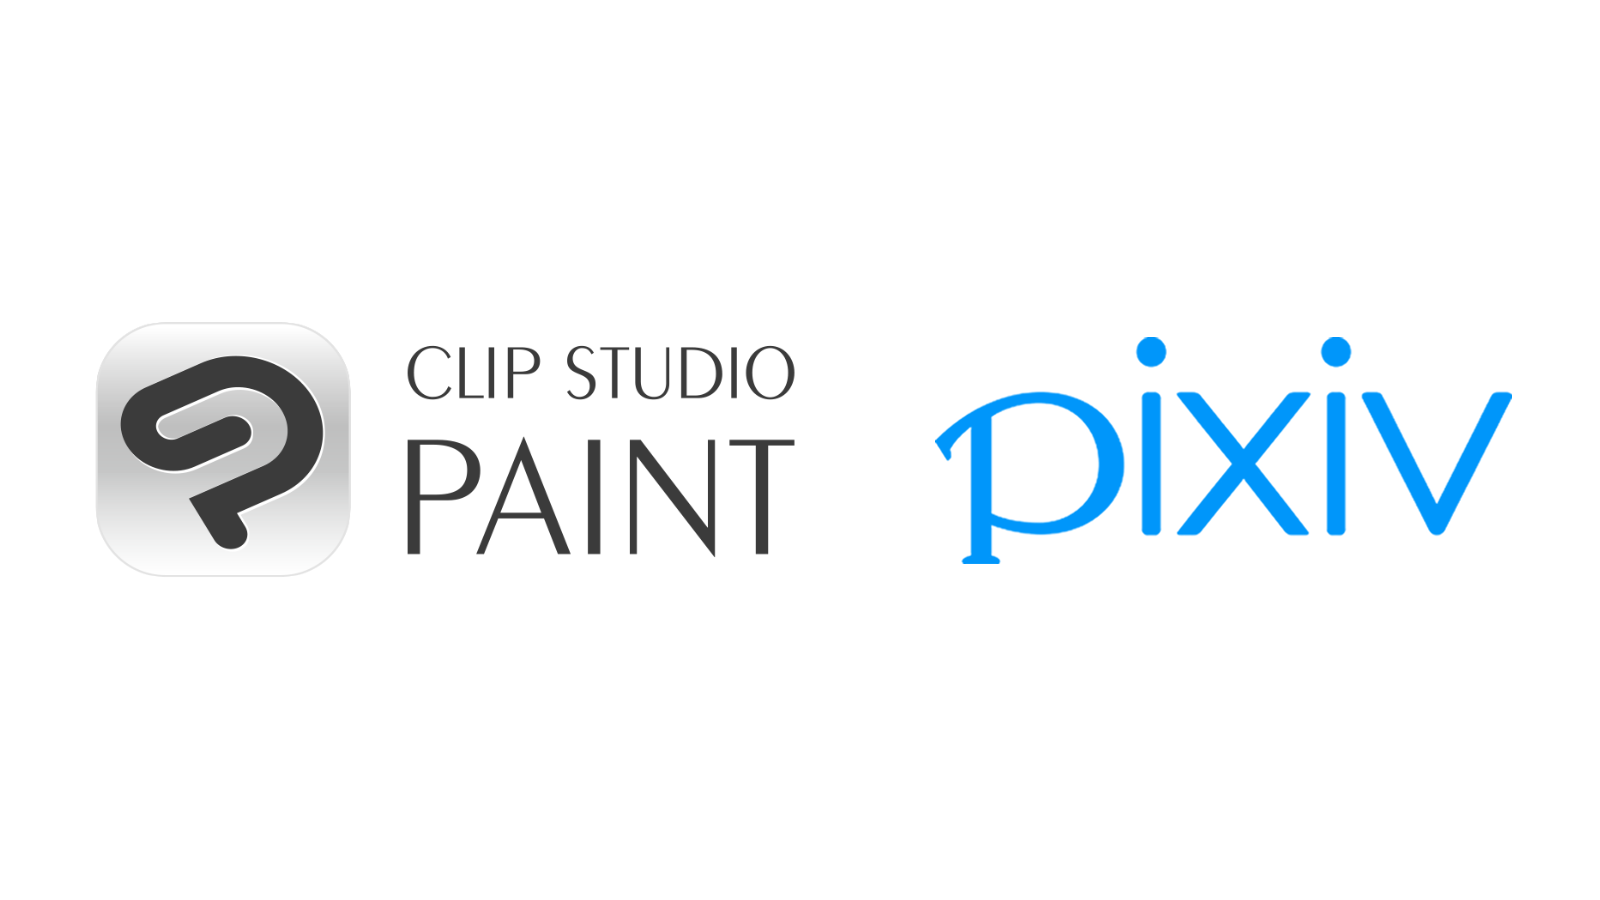 Clip Studio Paint DEBUT offered to pixiv Premium members refreshed　Now with multi-device support